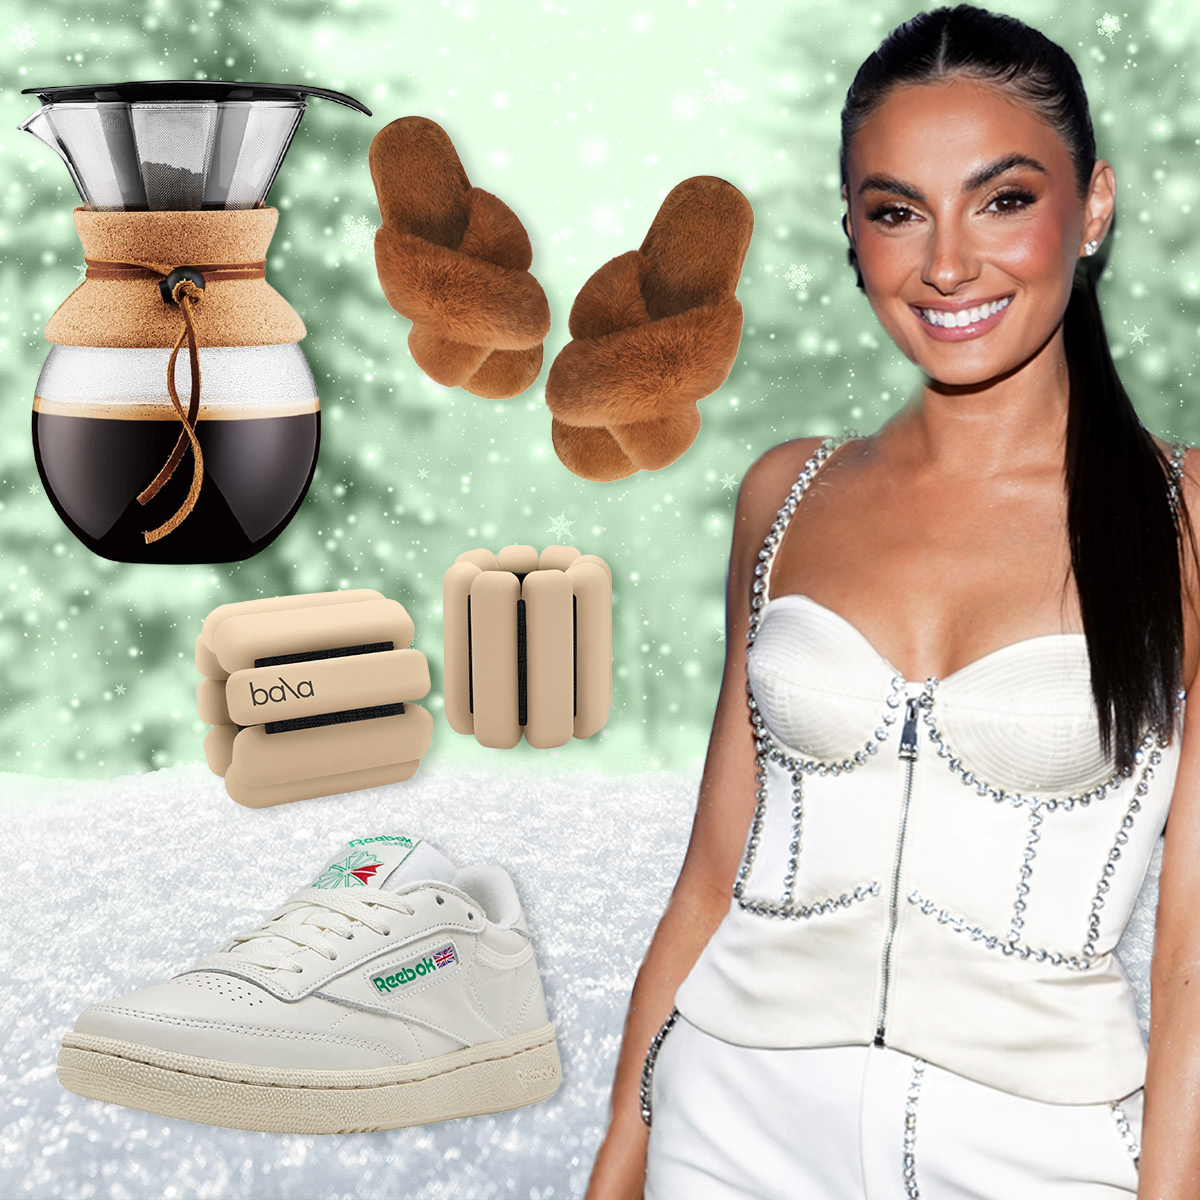 Paige DeSorbo's Gift Picks for Hard to Shop for People on Your List